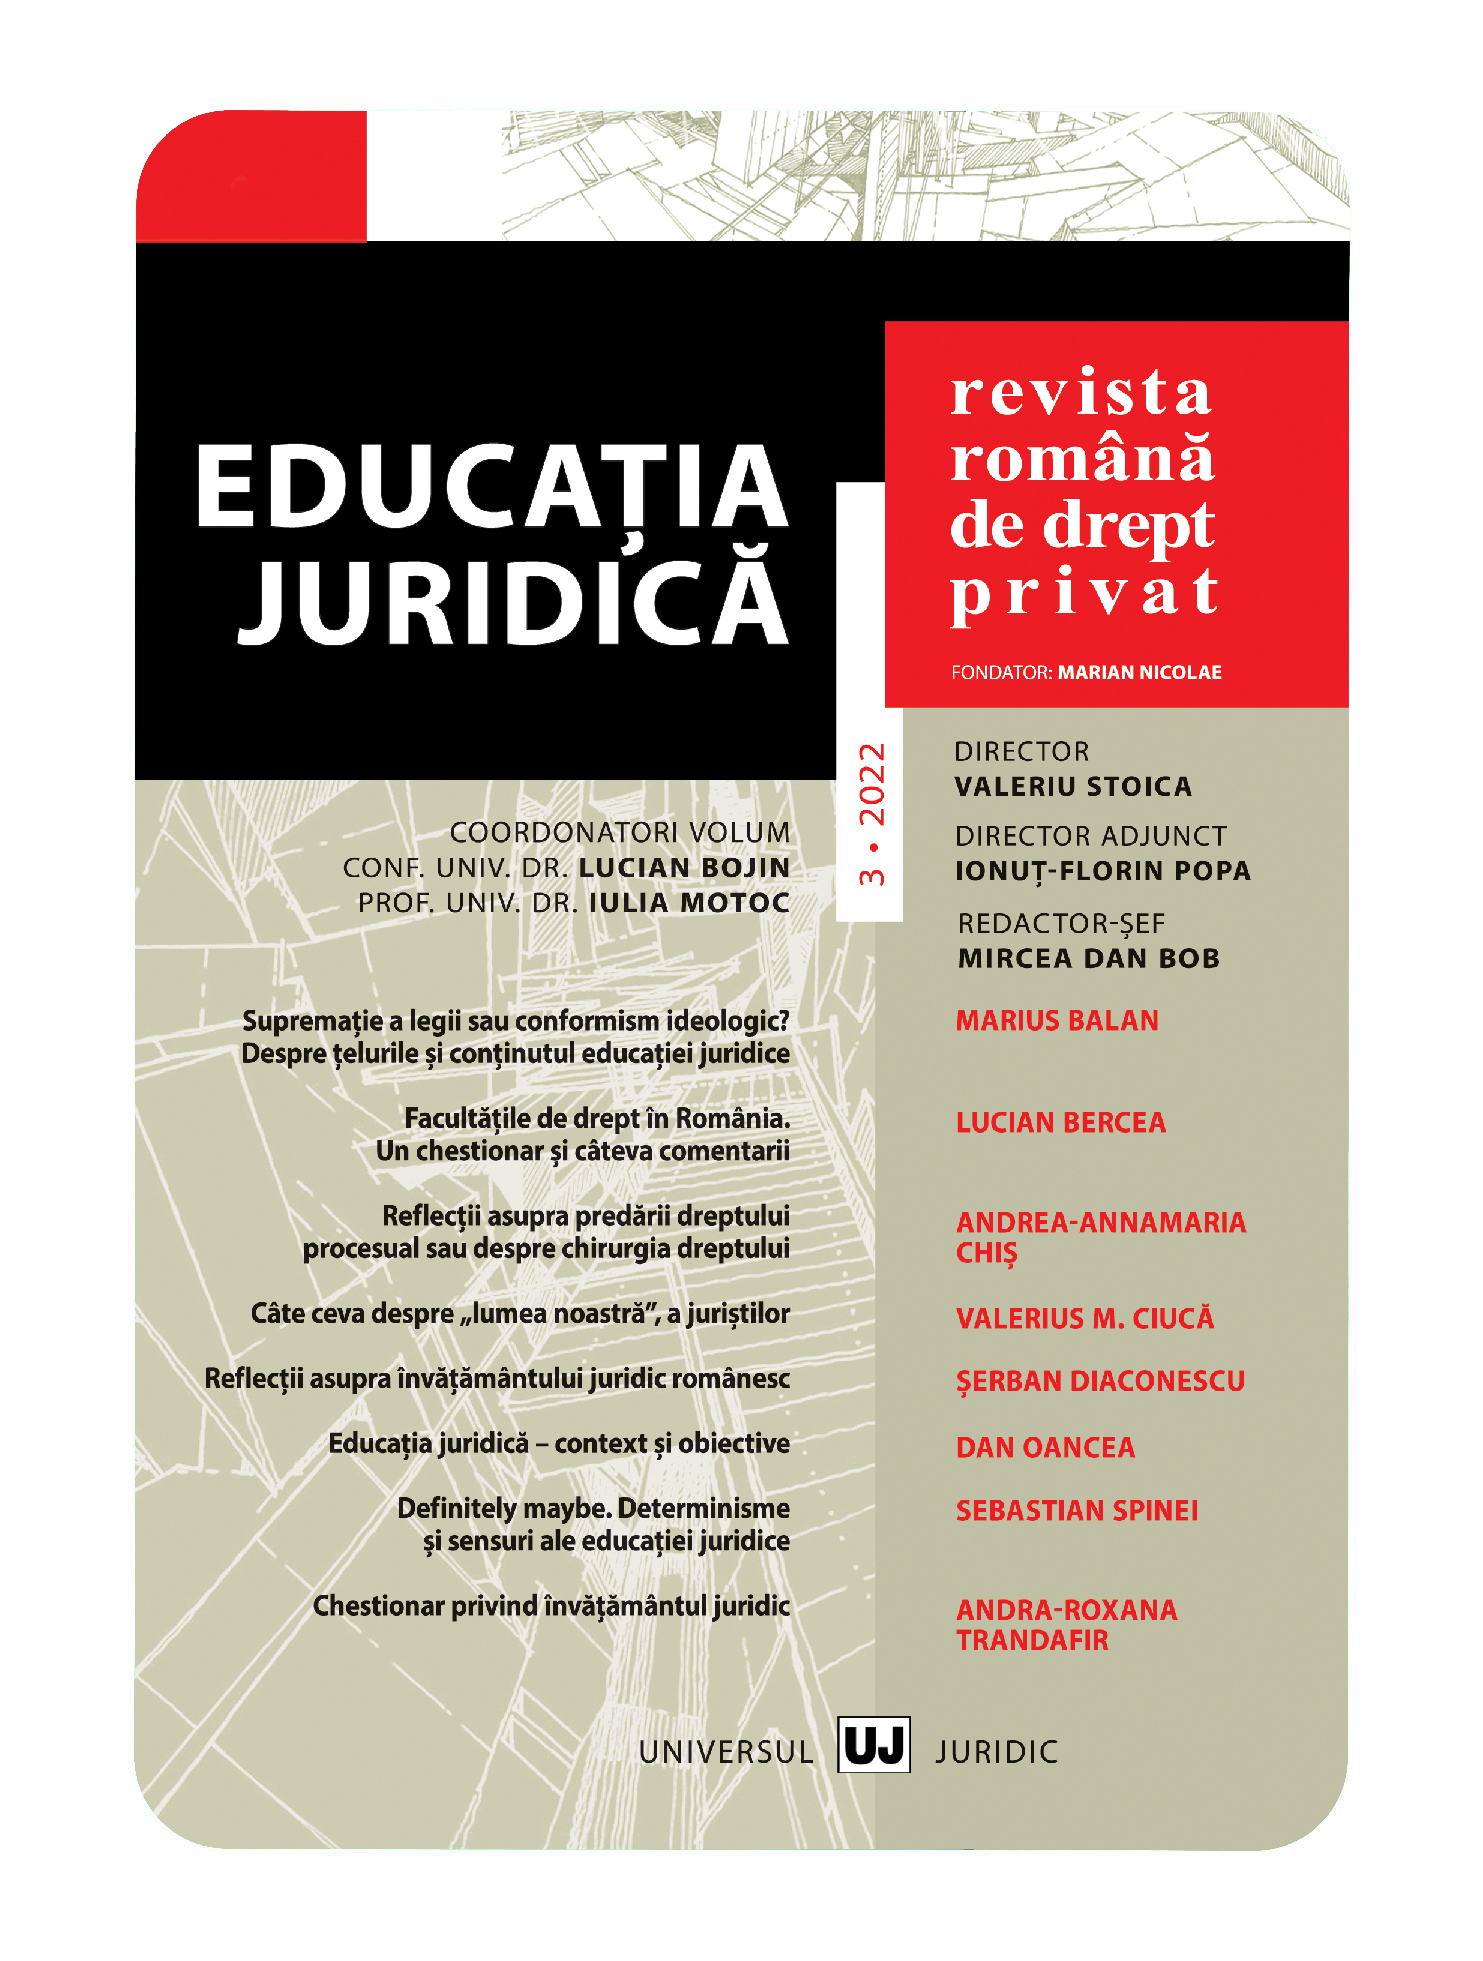 Why about legal education? Cover Image